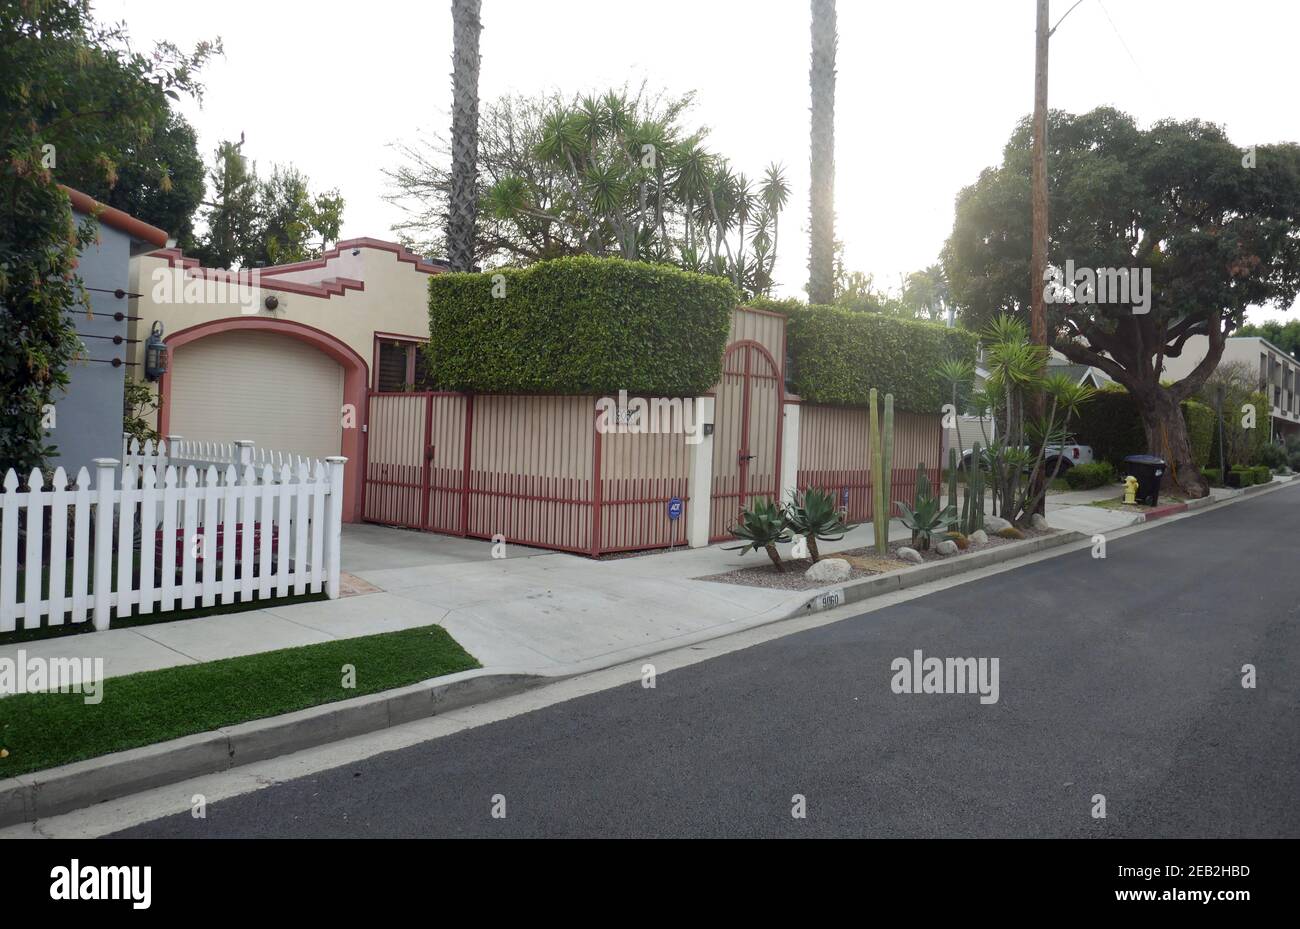 West Hollywood, California, USA 11th February 2021 A general view of atmosphere of former home/house of Singer Dolly Parton and actress Natalie Wood at 9069 Harland Avenue on February 11, 2021 in West Hollywood, California, USA. Photo by Barry King/Alamy Stock Photo Stock Photo